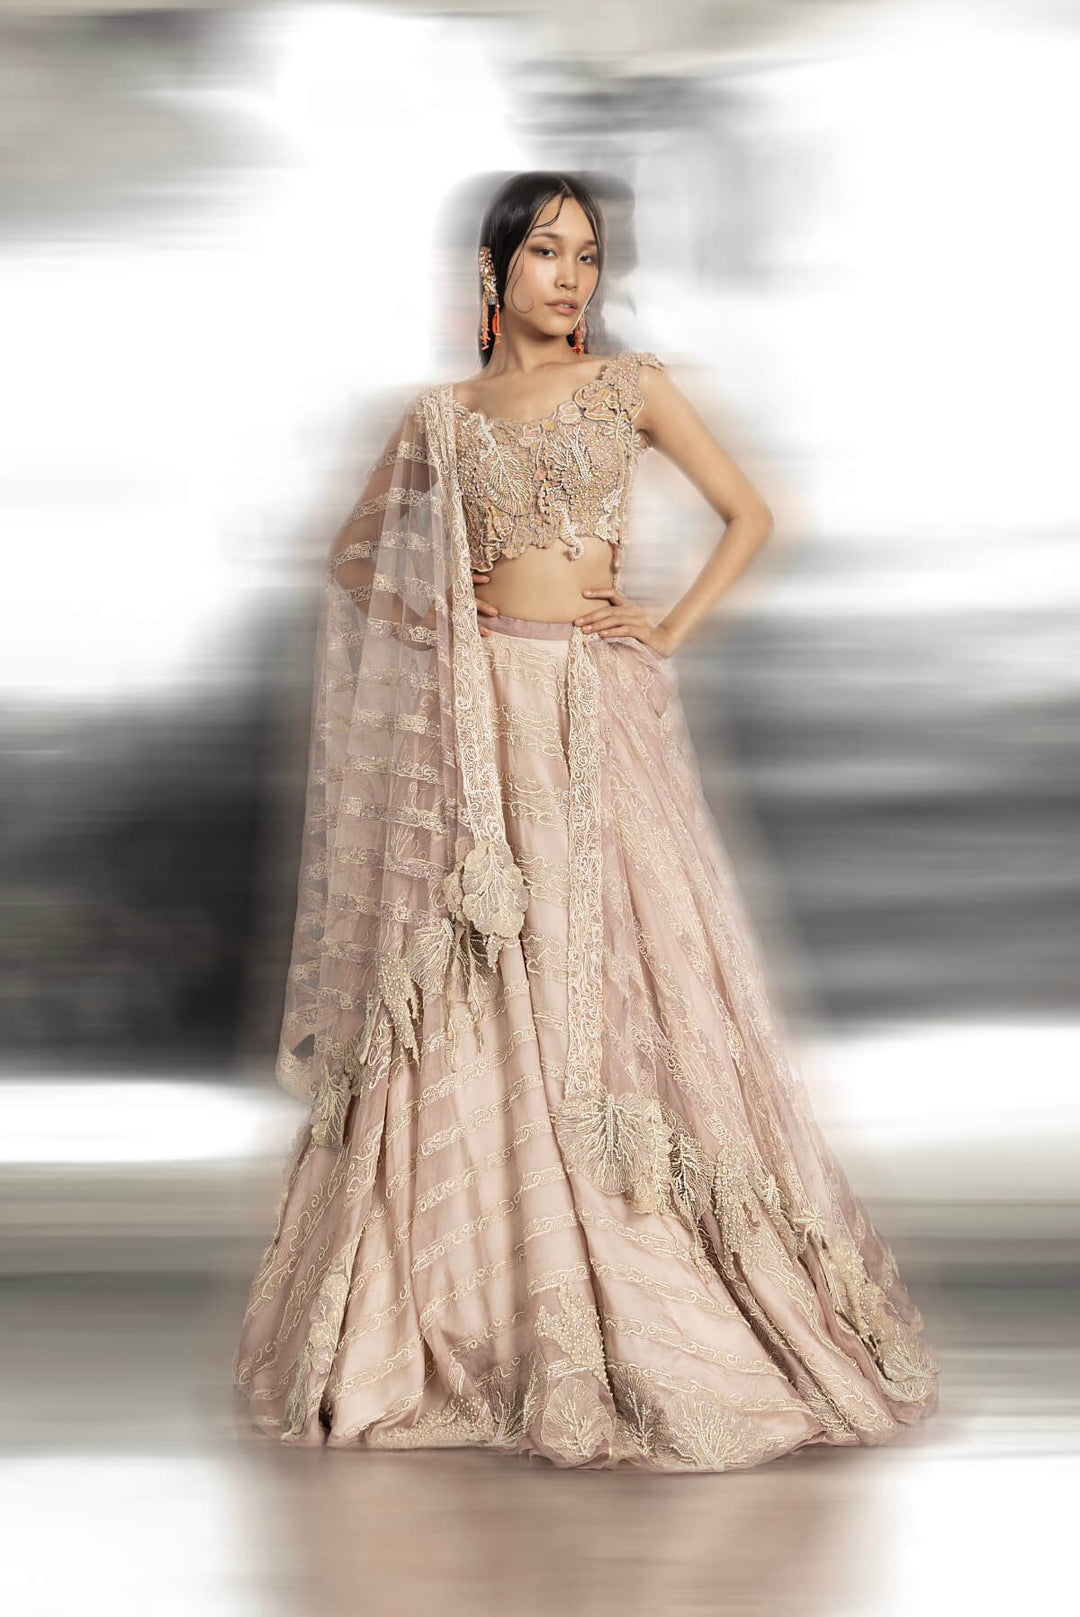 Silk Organza Lehenga with 3D embroidery detailing of the blouse